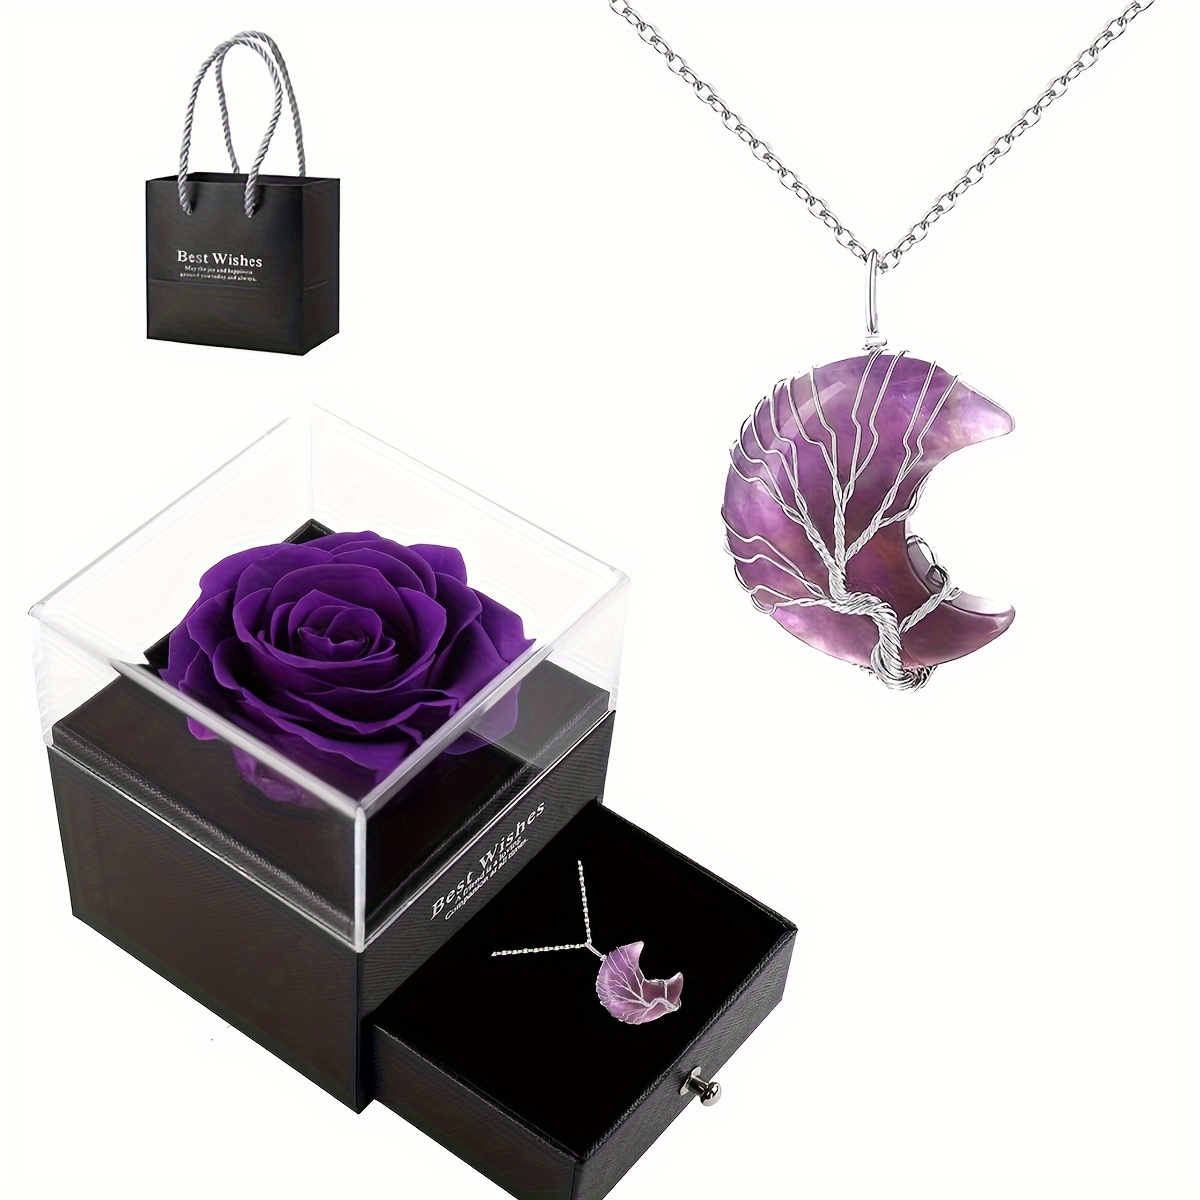 

Tree Of Life Wrapped Amethyst Moon Pendant Necklace, With Rose Gift Box For Mom, Lover, Wife, Best Friend, Daughter, Christmas Mother's Day Valentine's Day Birthday Gift